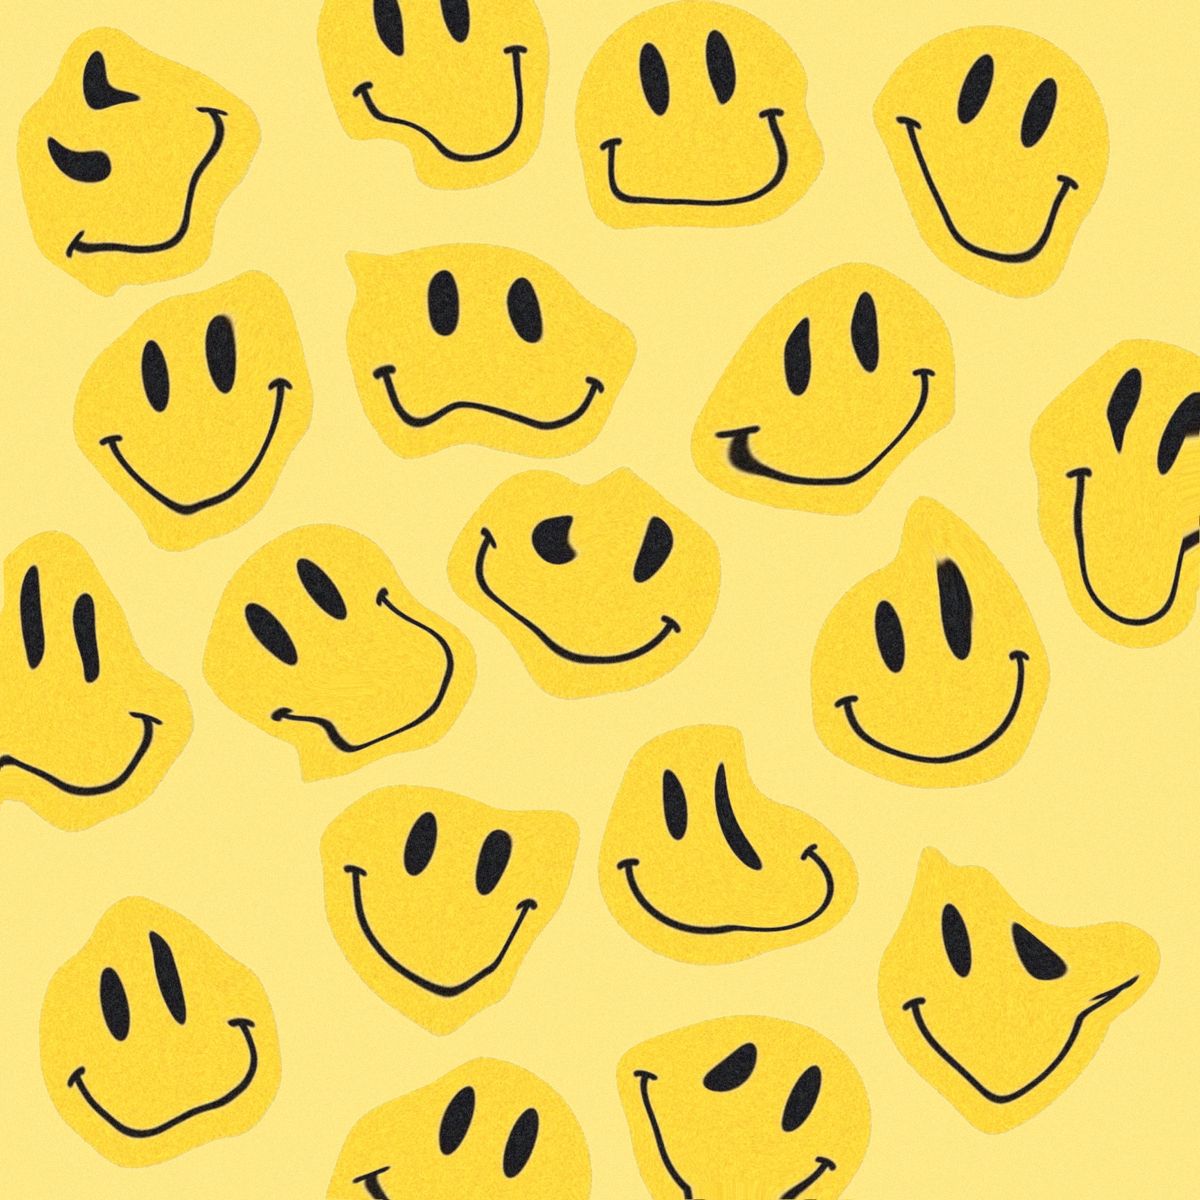 Smiley face iphone wallpaper yellow yellow aesthetic pastel yellow wallpaper